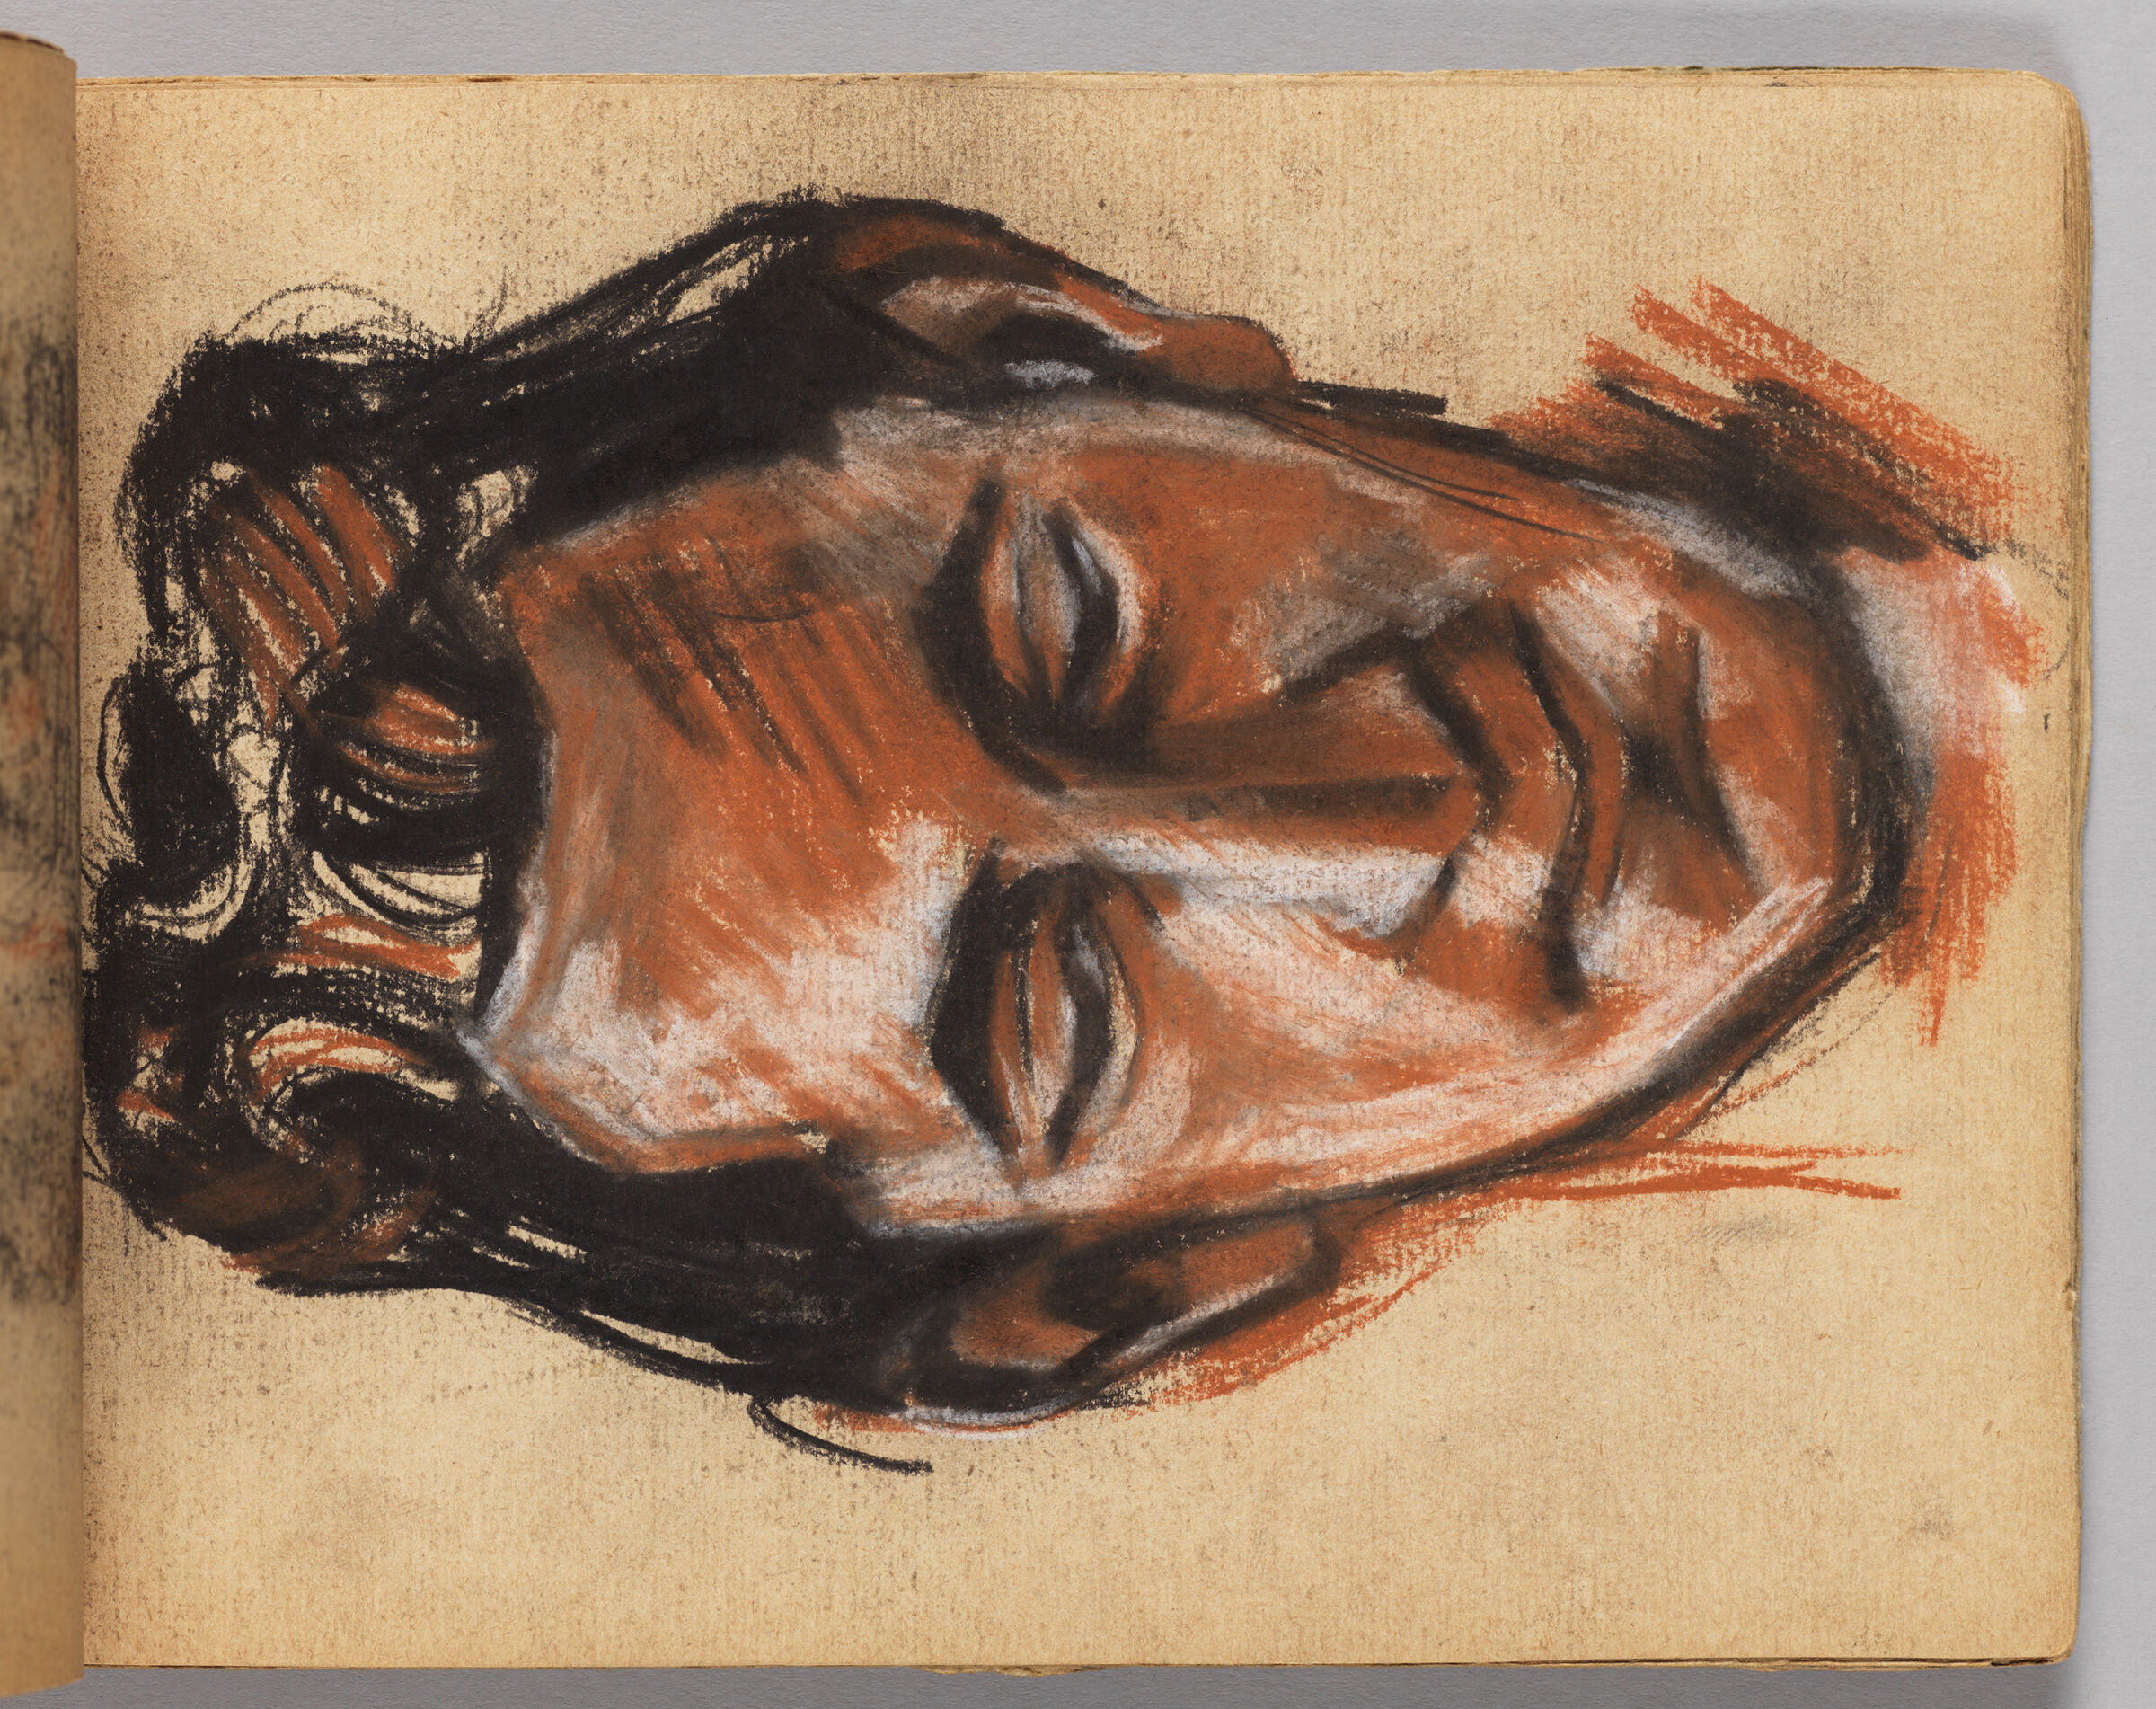 Untitled (Two Figure Studies And Color Transfer, Left Page); Untitled (Frontal Portrait, Right Page)